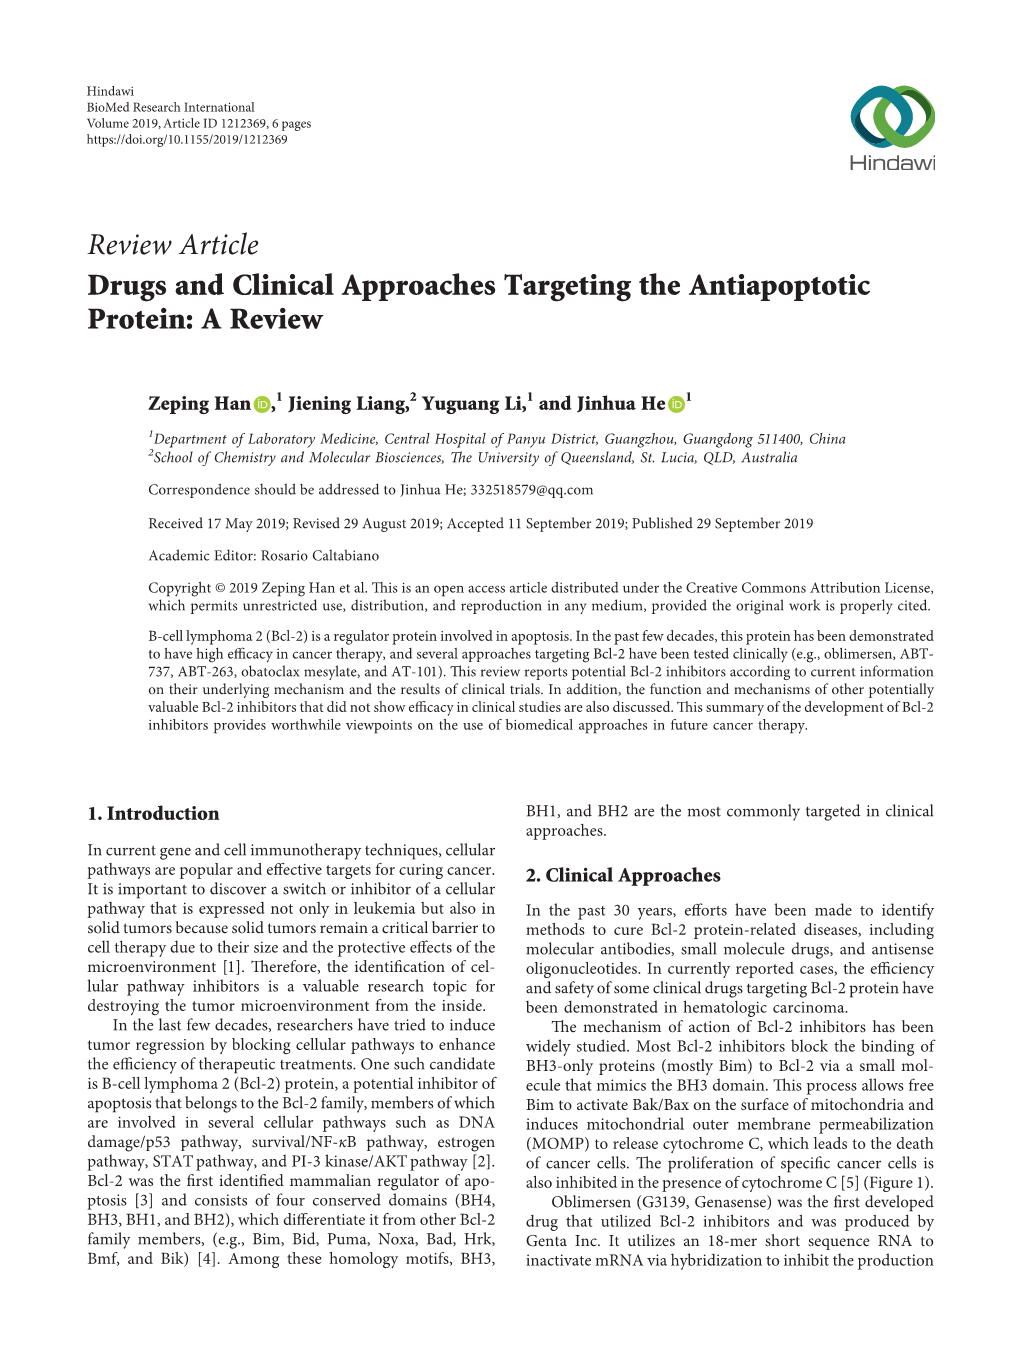 Drugs and Clinical Approaches Targeting the Antiapoptotic Protein: a Review